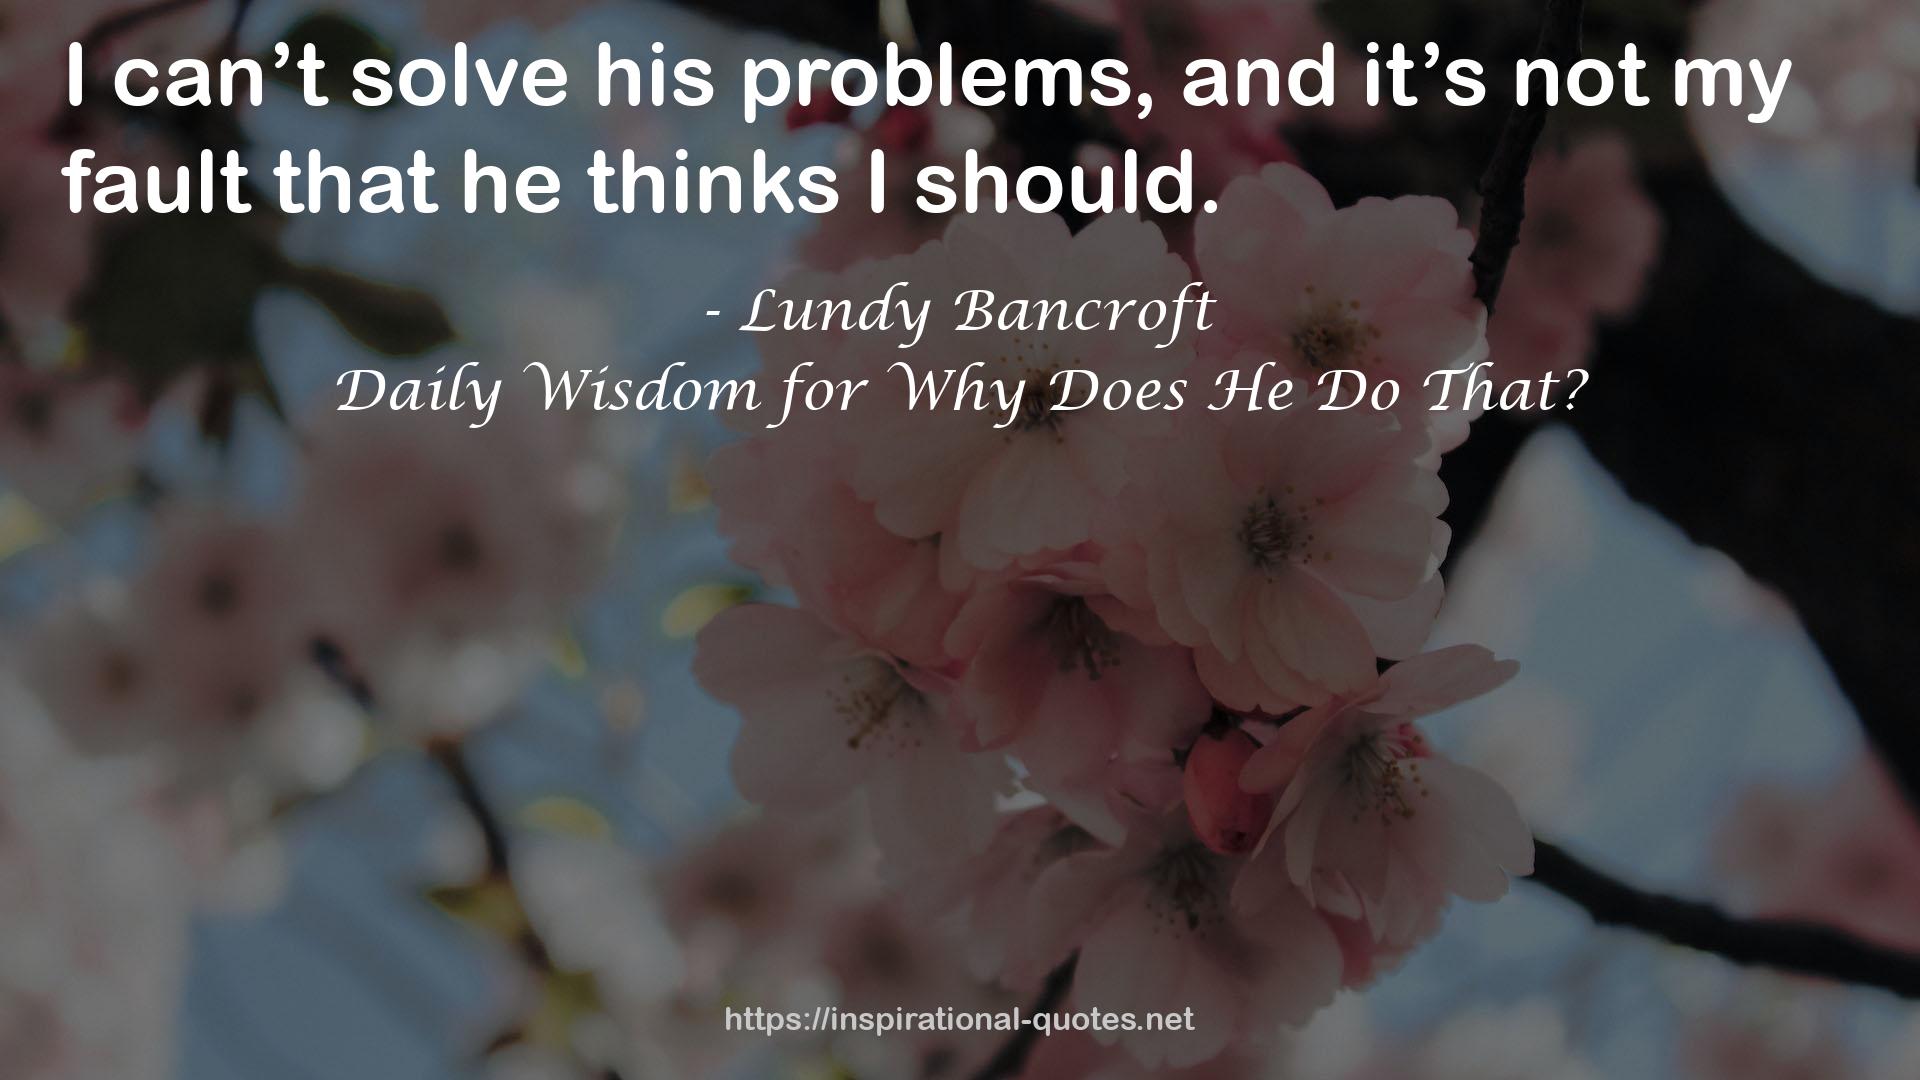 Daily Wisdom for Why Does He Do That? QUOTES